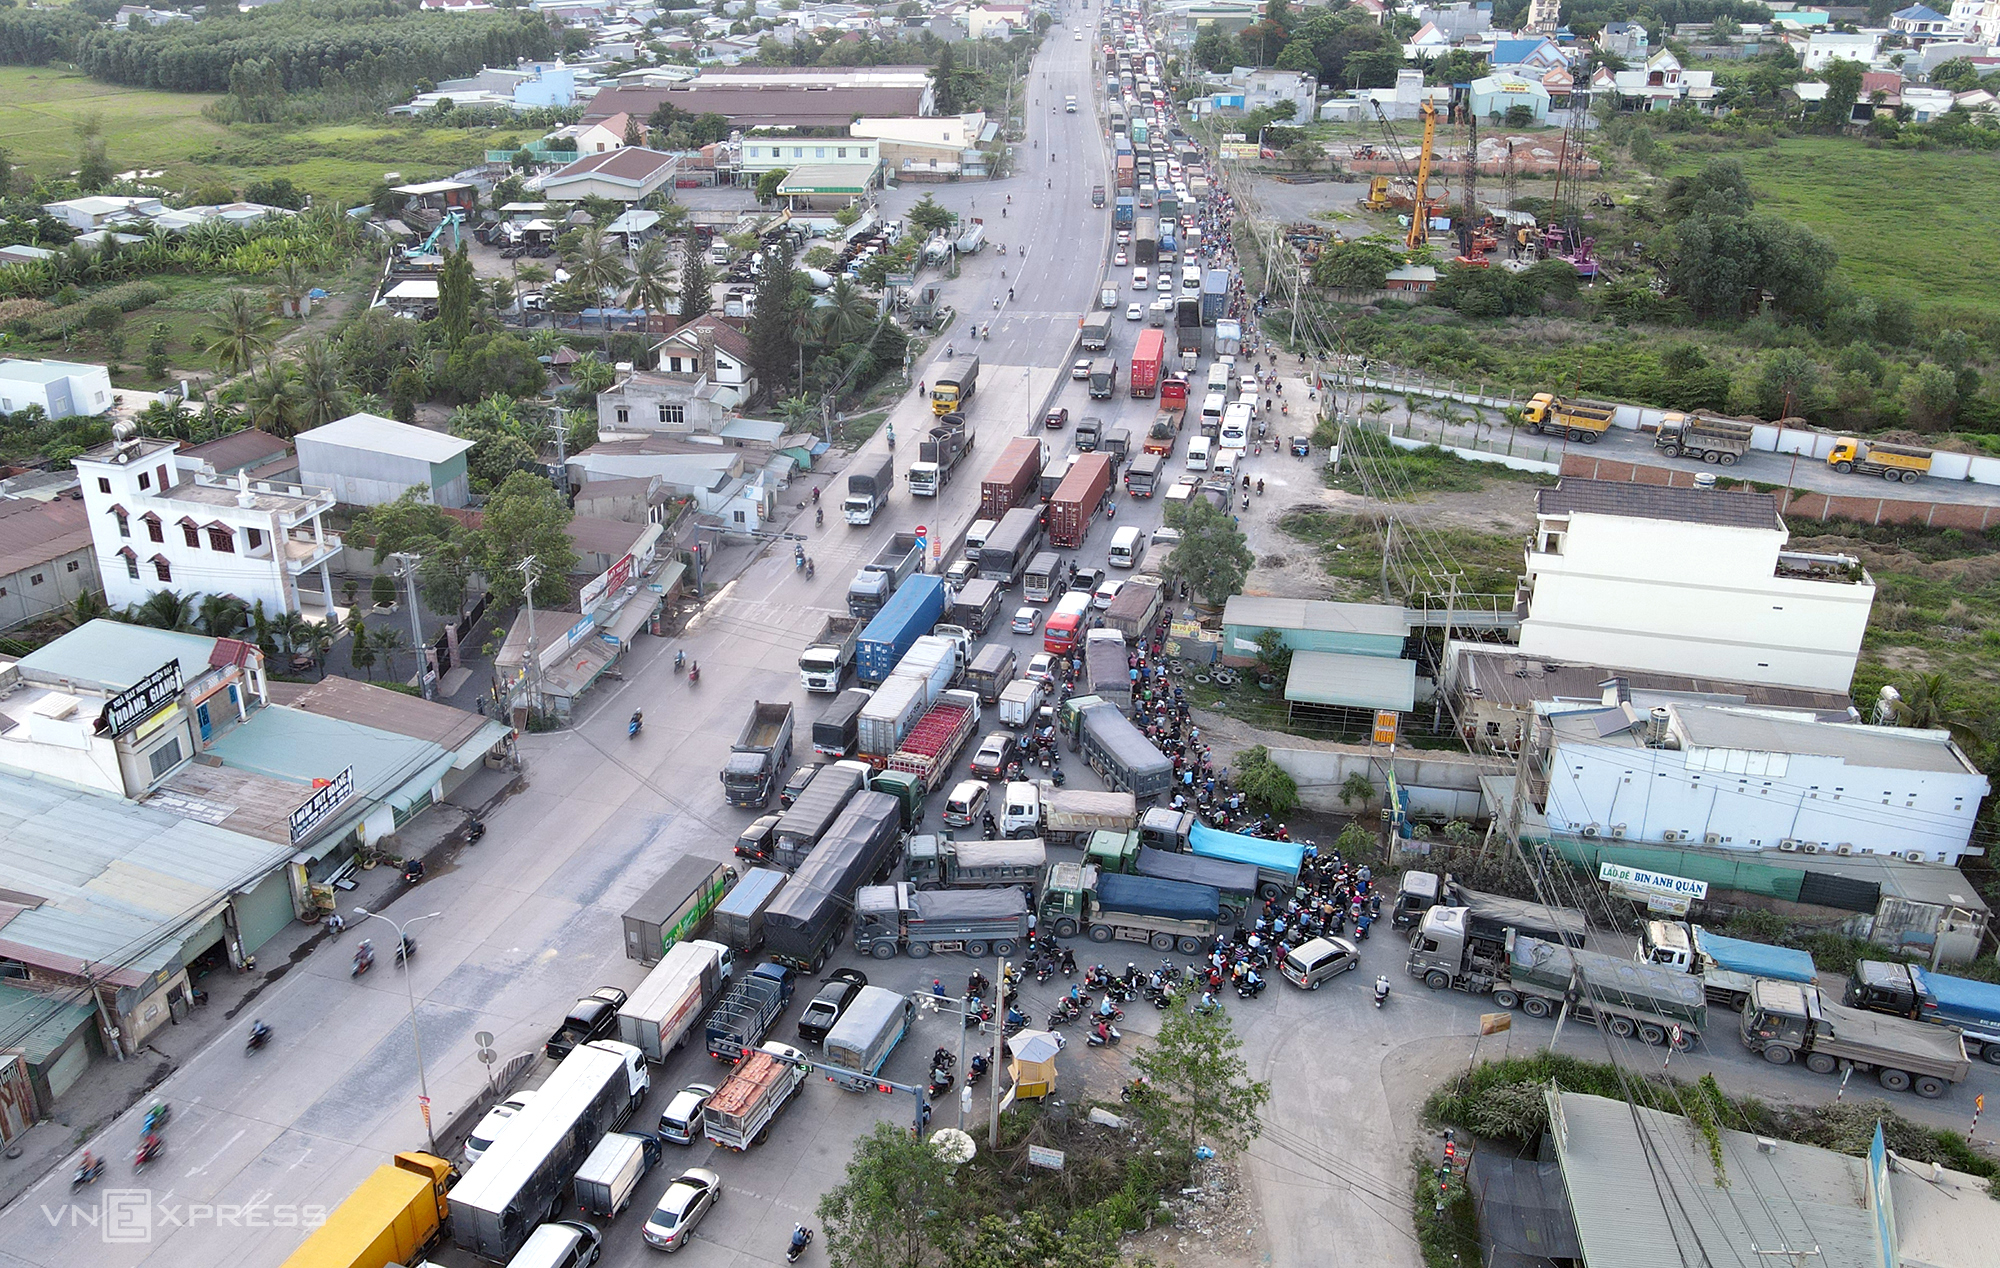 Traffic jam on National Highway 51 in Dong Nai Province, 2021. Photo by VnExpress/Phuoc Tuan